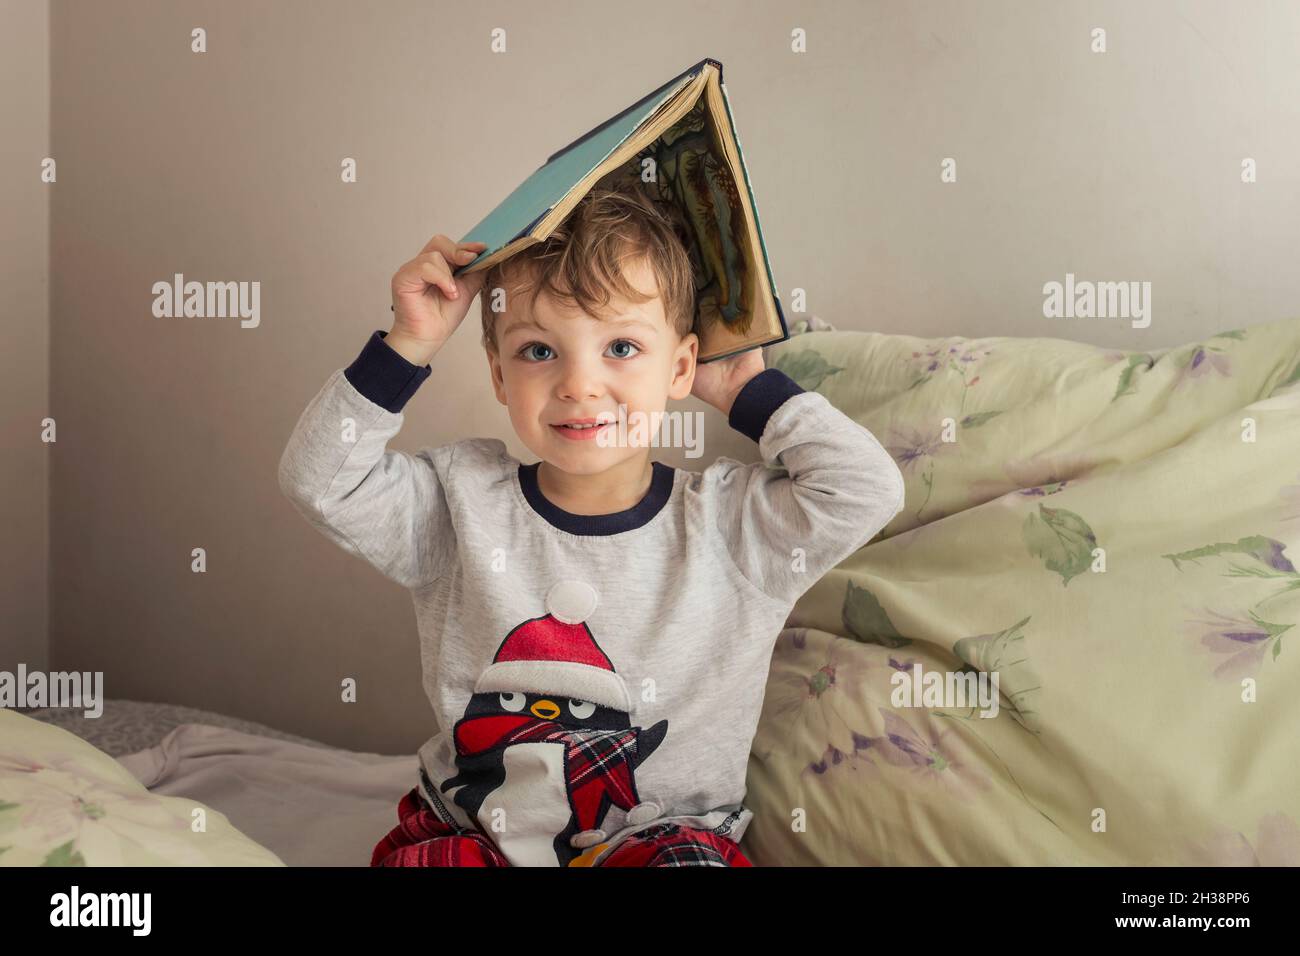 Toddler in pajamas putting book on his head and sitting on a bed Stock Photo